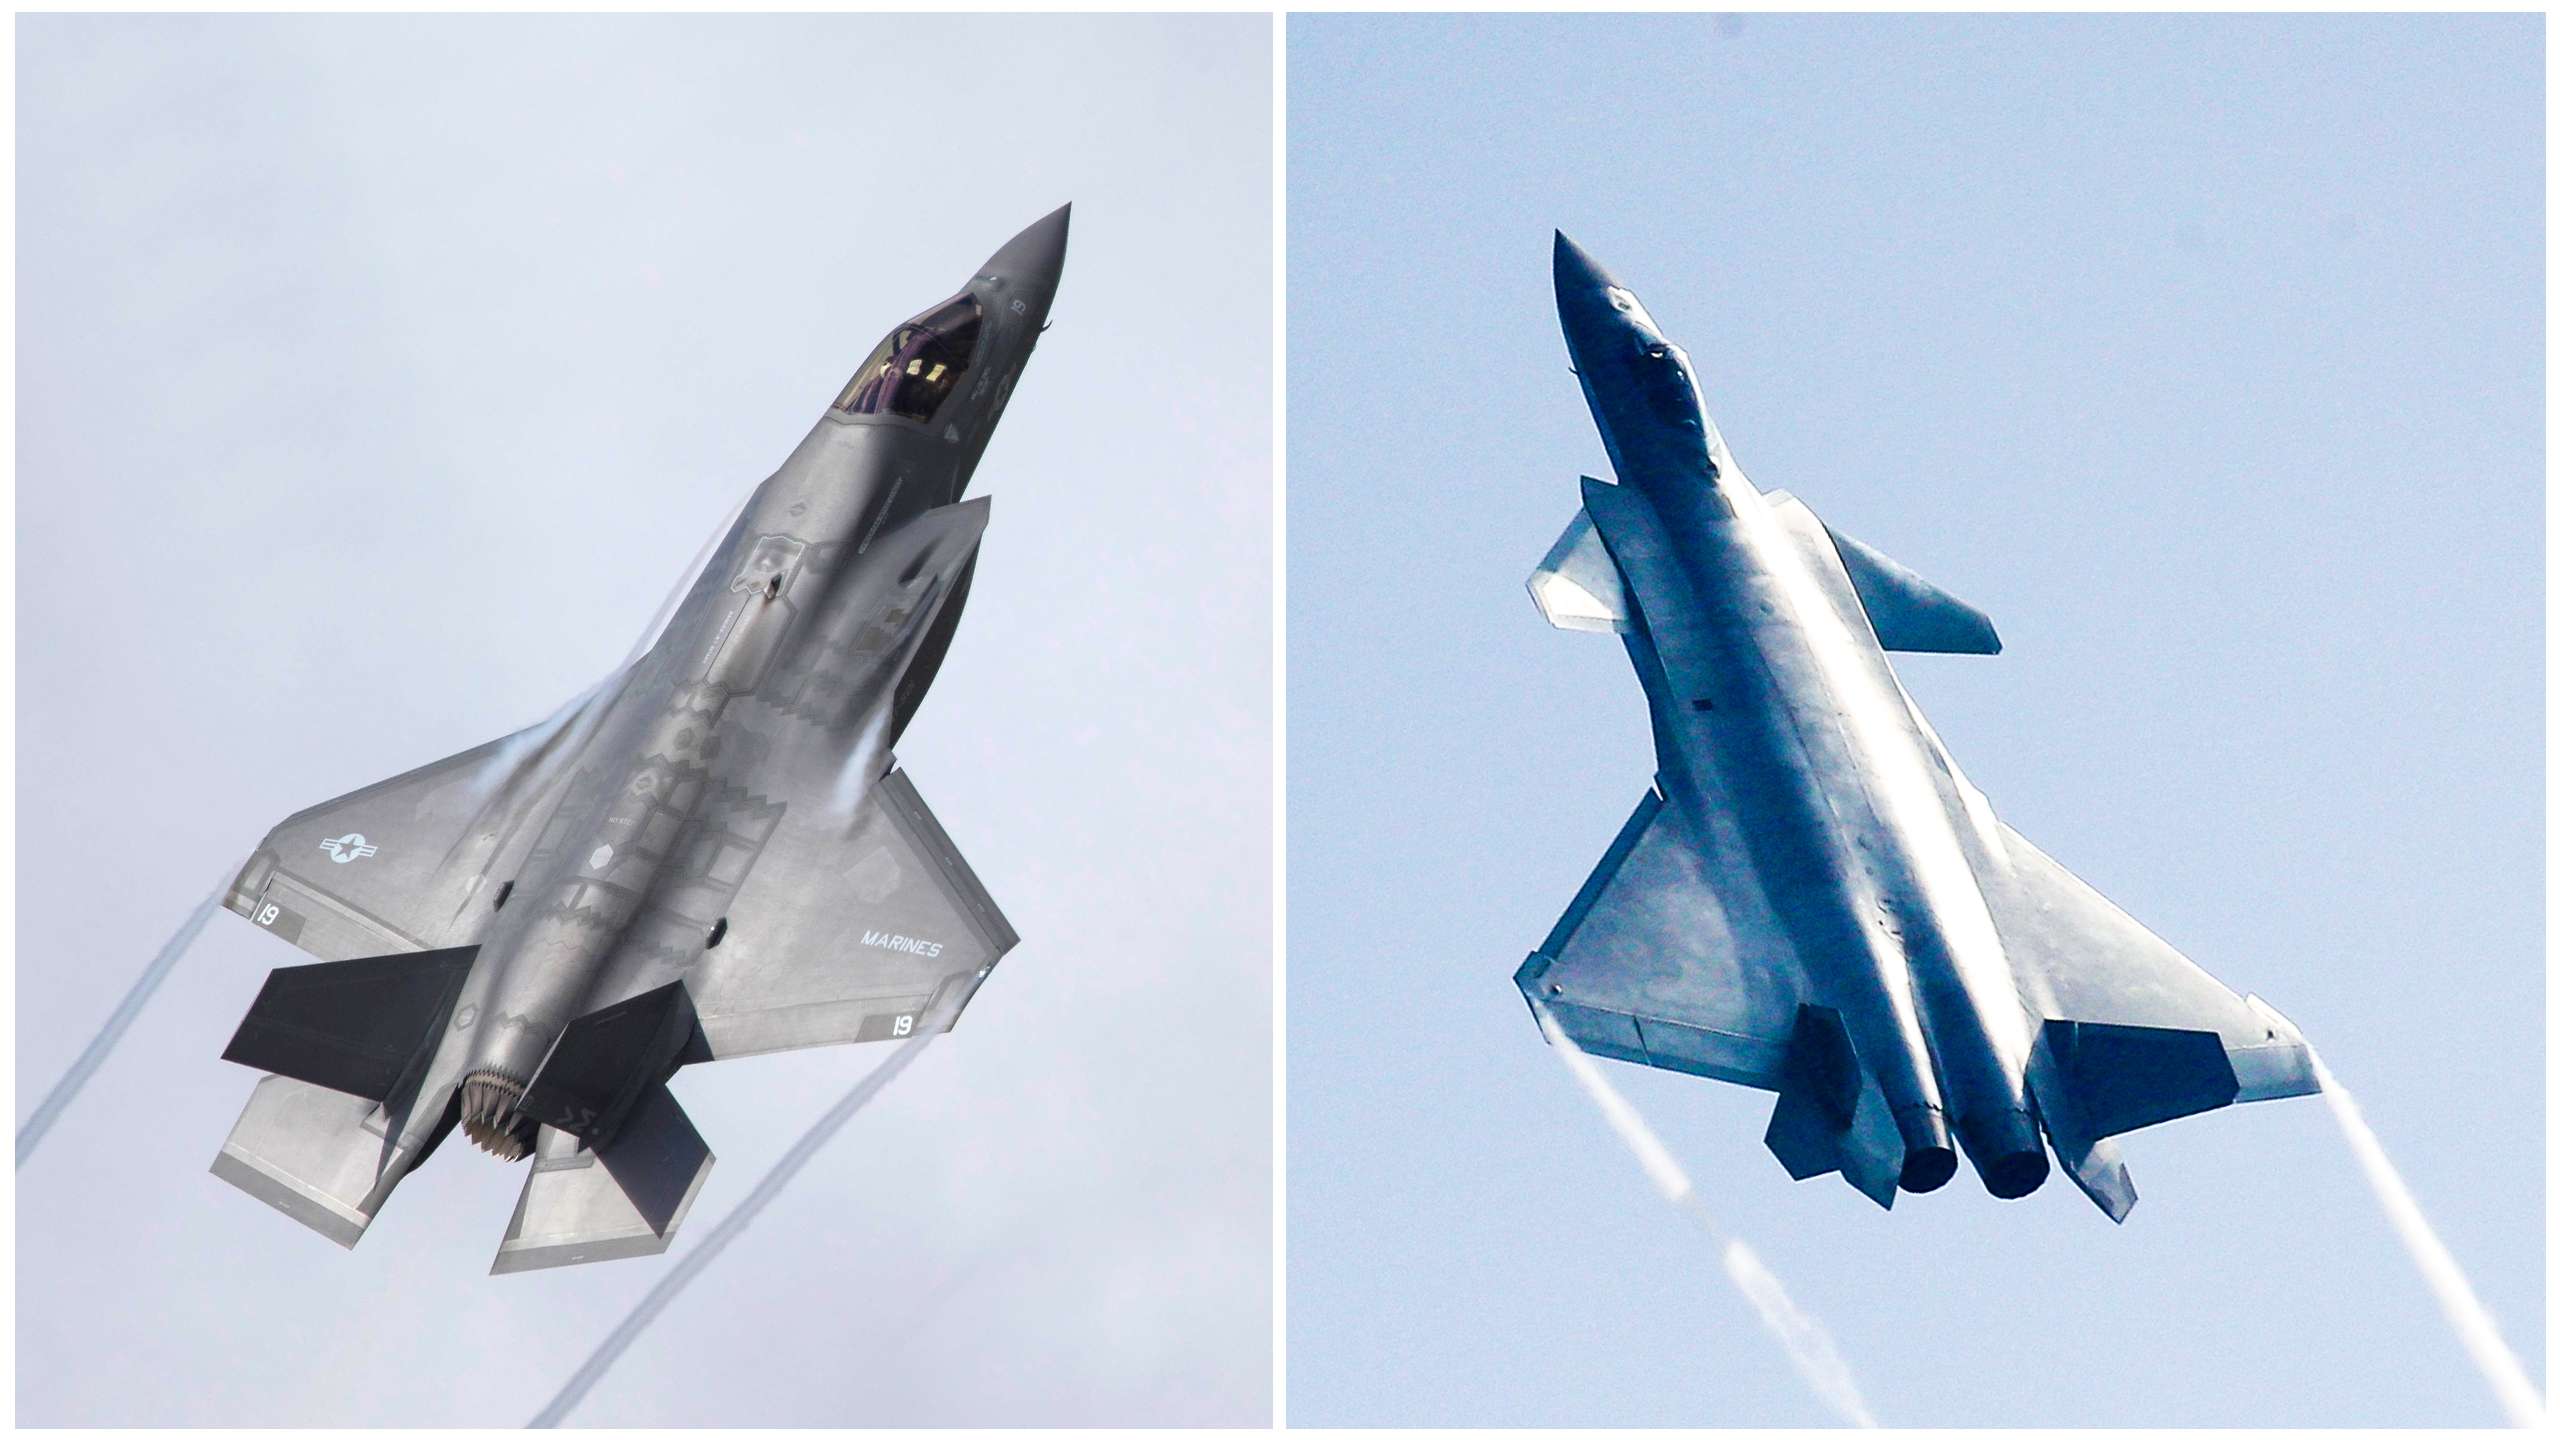 China producing J20 fighter jets quickly to counter the US and Japanese F35s